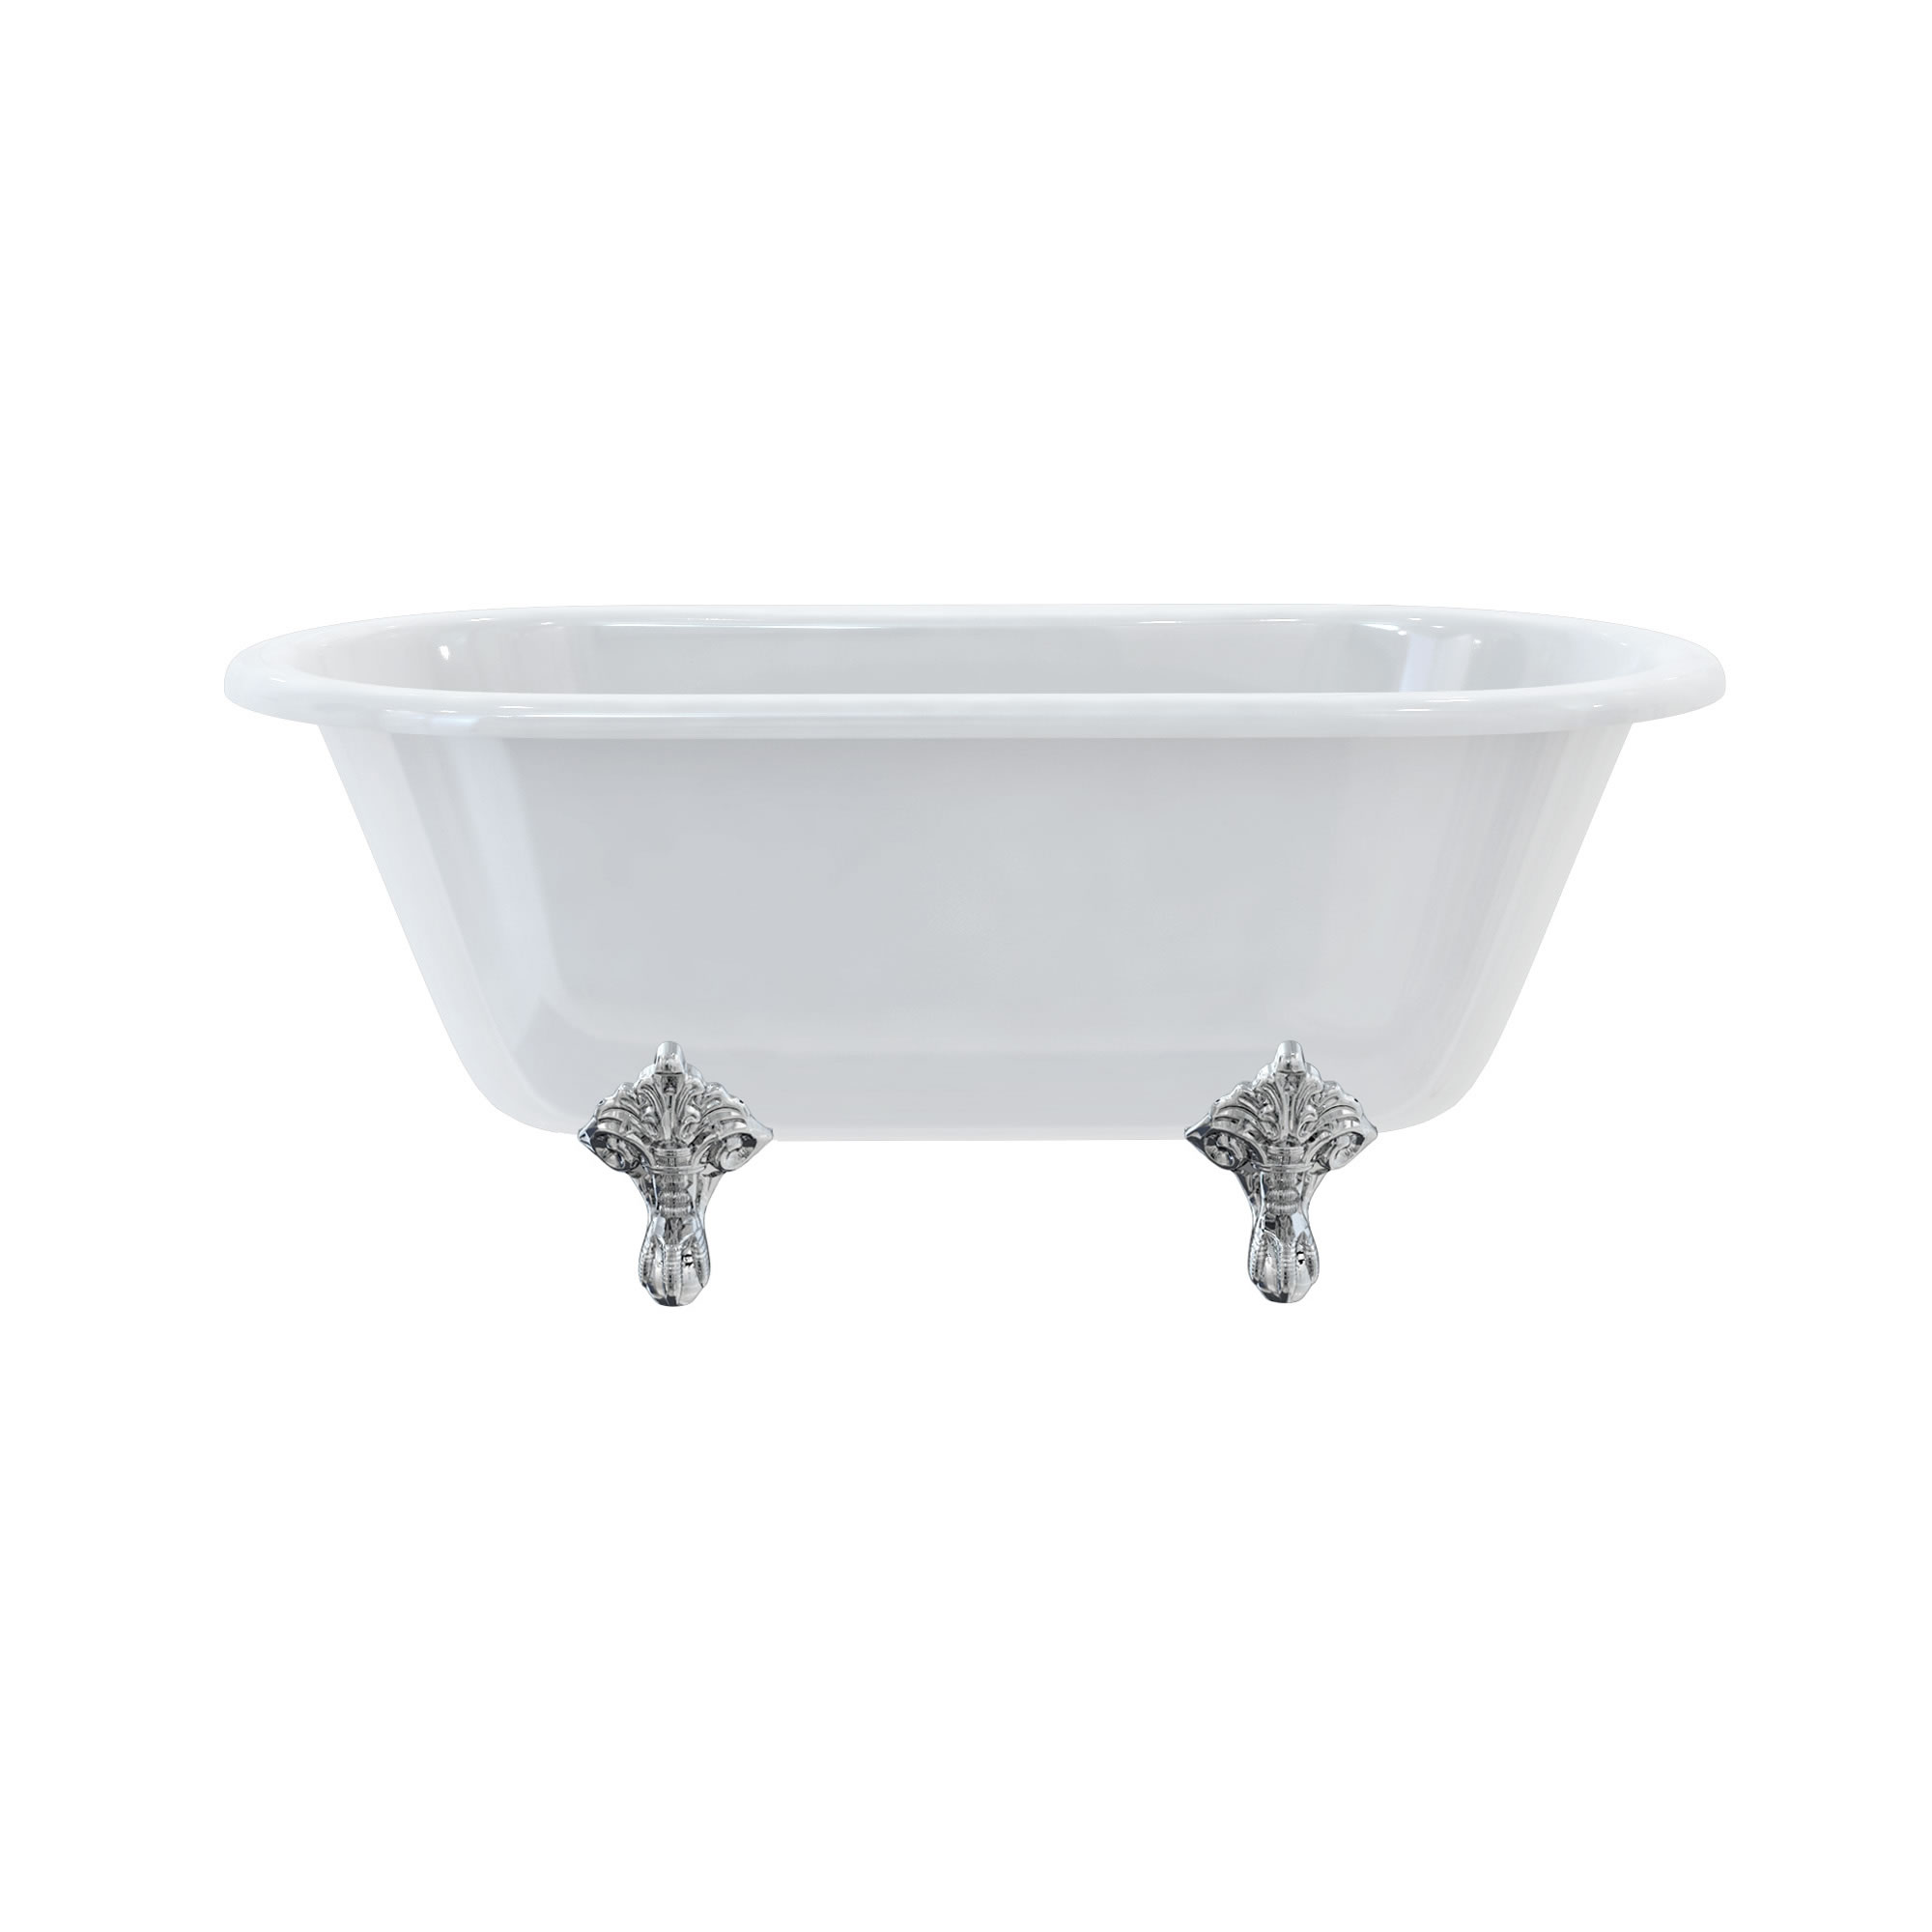 Windsor double ended 150cm bath with standard legs